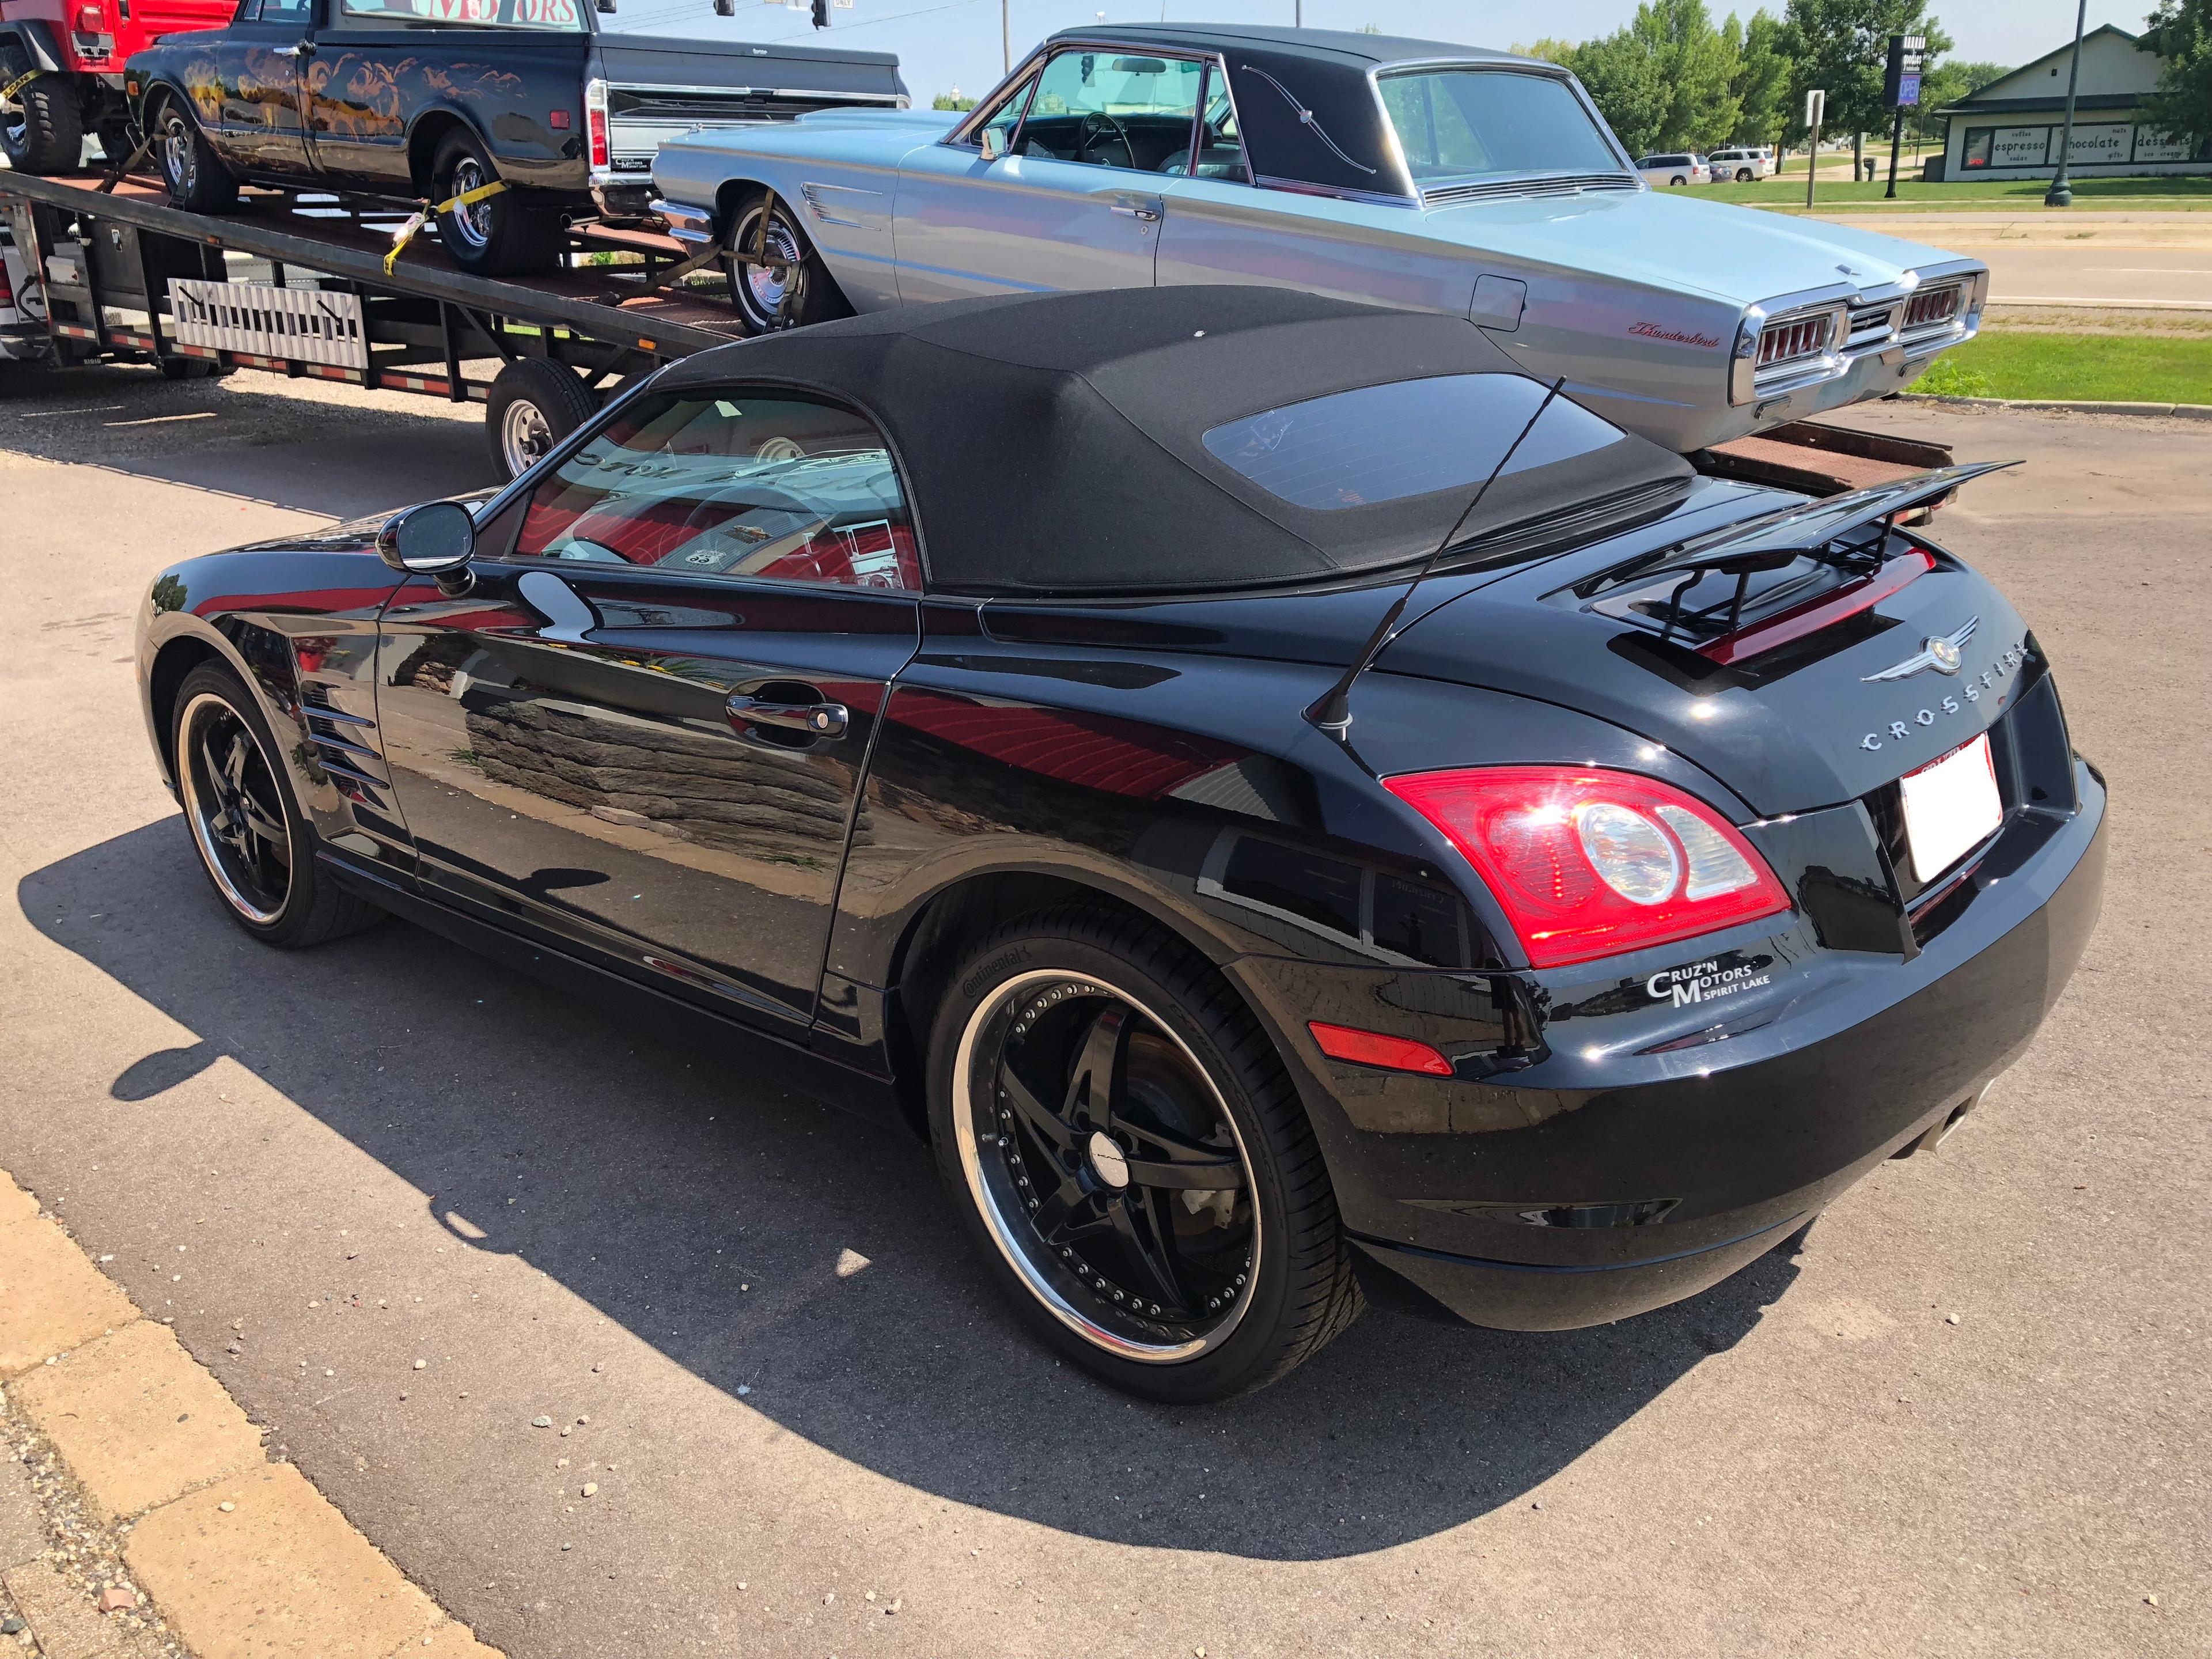 2006 CHRYSLER CROSSFIRE CONVERTIBLE ROADSTER 3.2 2WD MANUAL